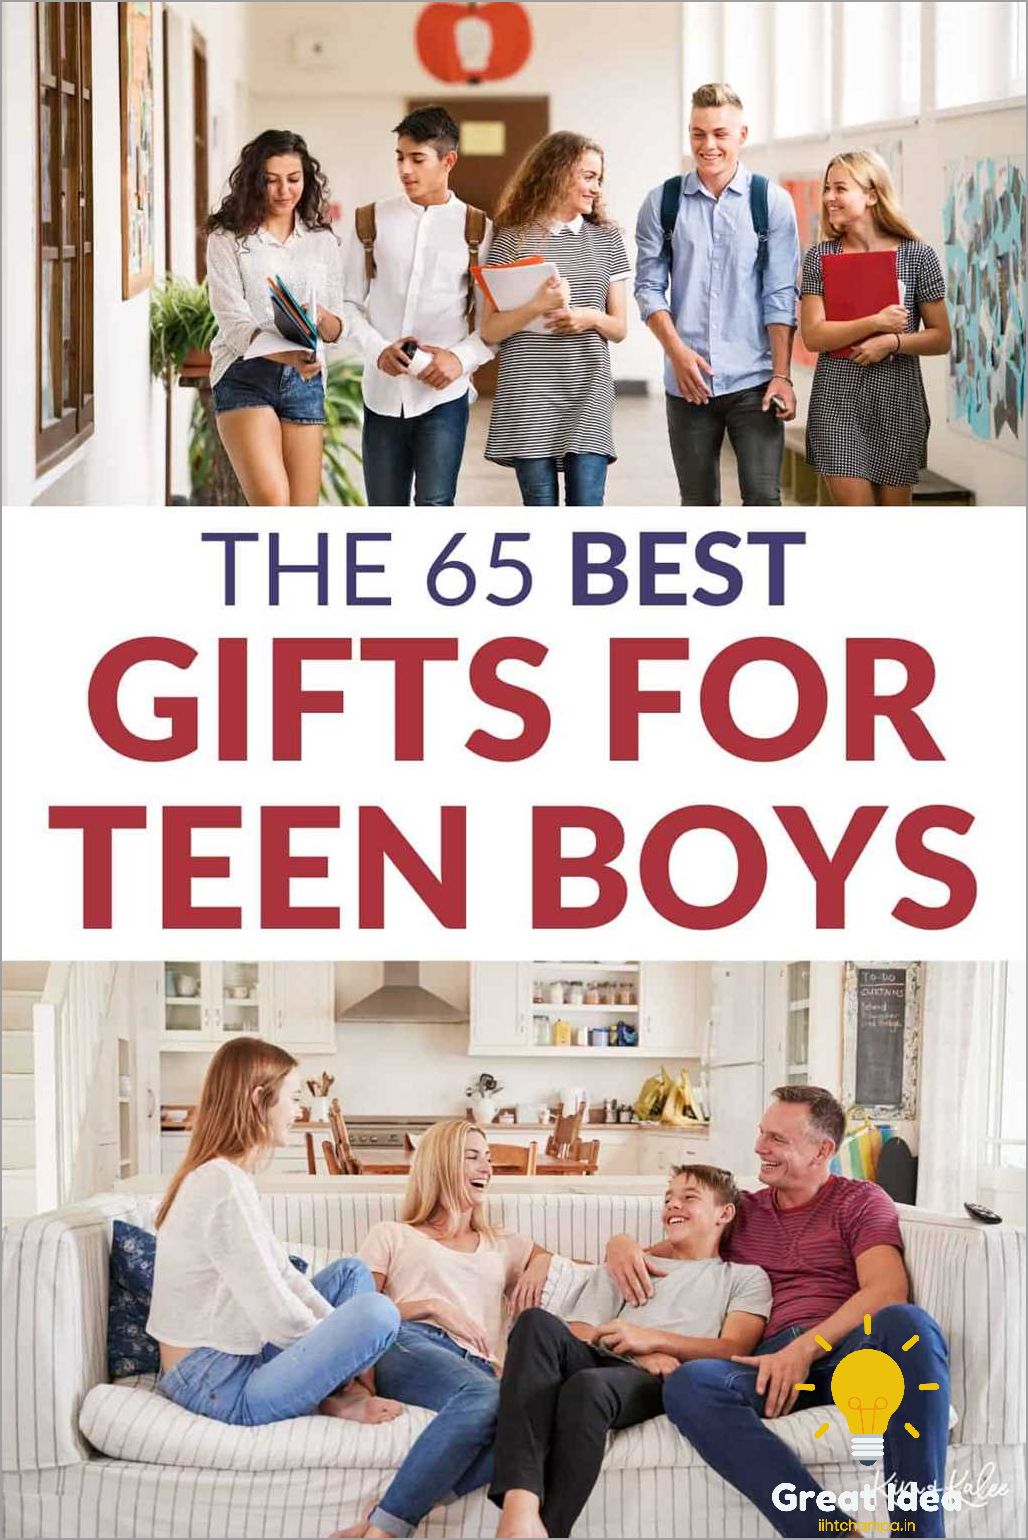 Top 10 Gift Ideas for 14 Year Old Boys - Perfect Presents for Teenage Boys